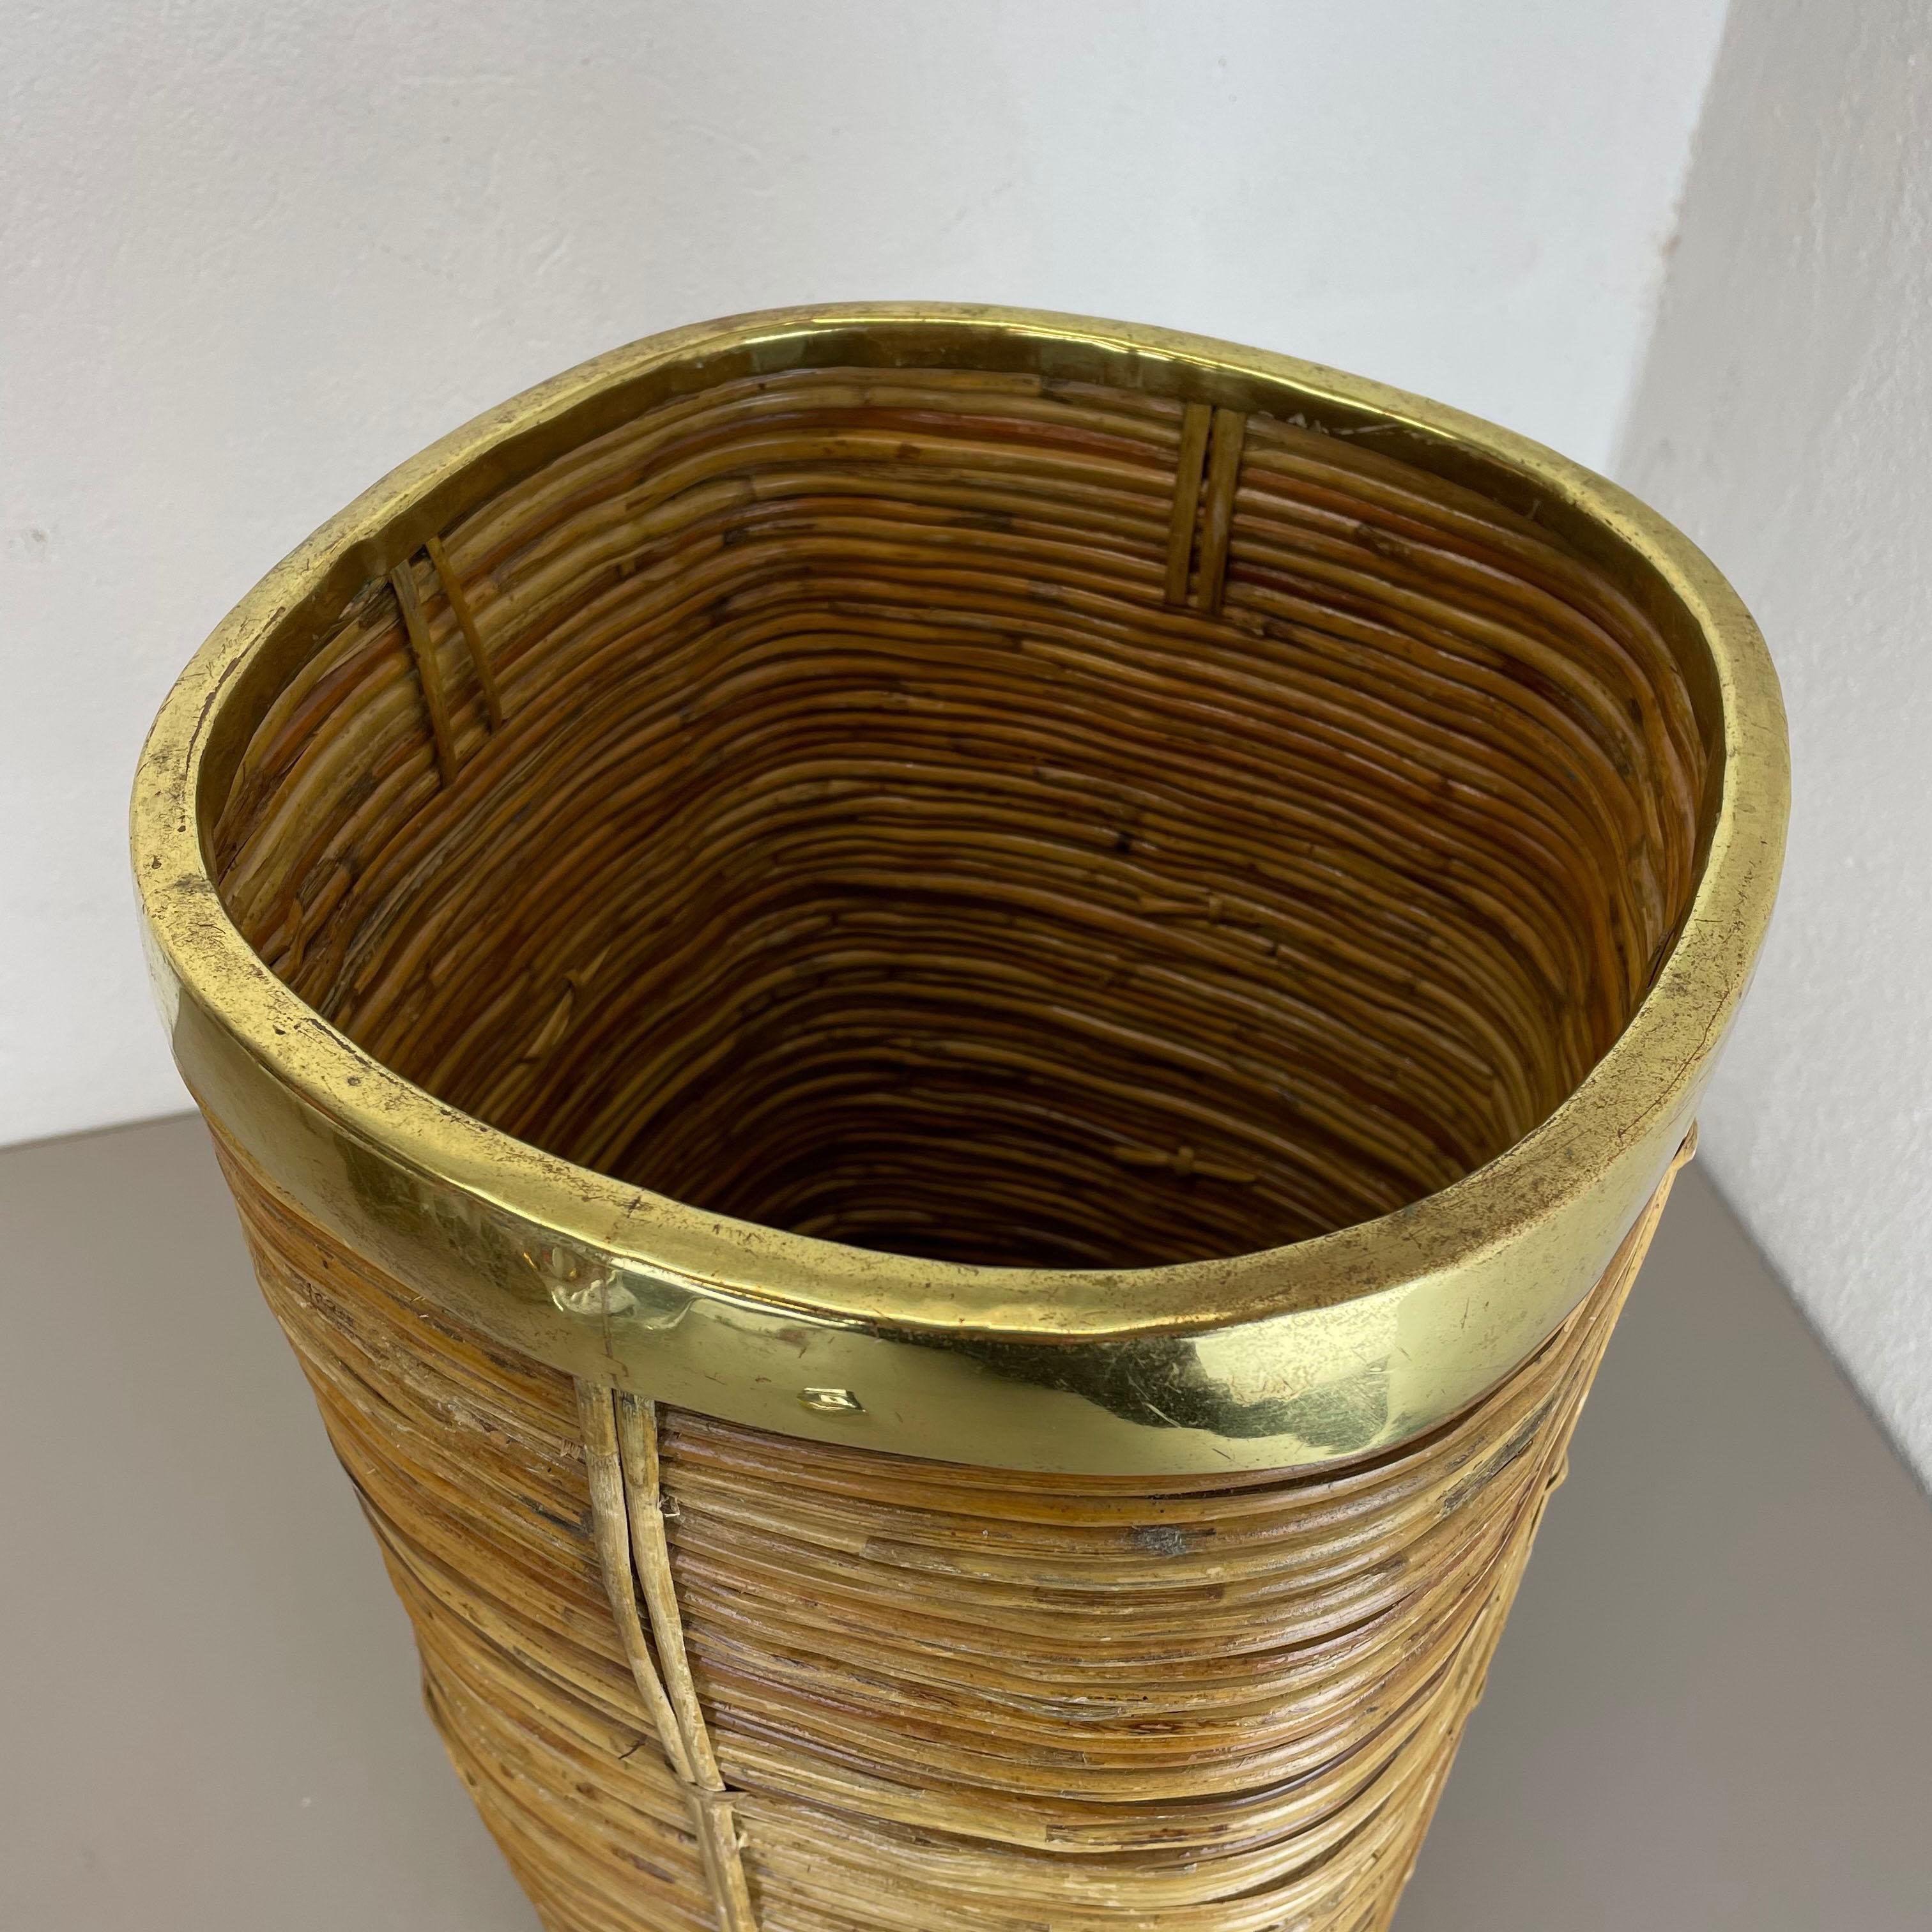 Aubock Style Mid-Century Rattan and Brass Bauhaus Waste Paper Bin, France, 1960s For Sale 10